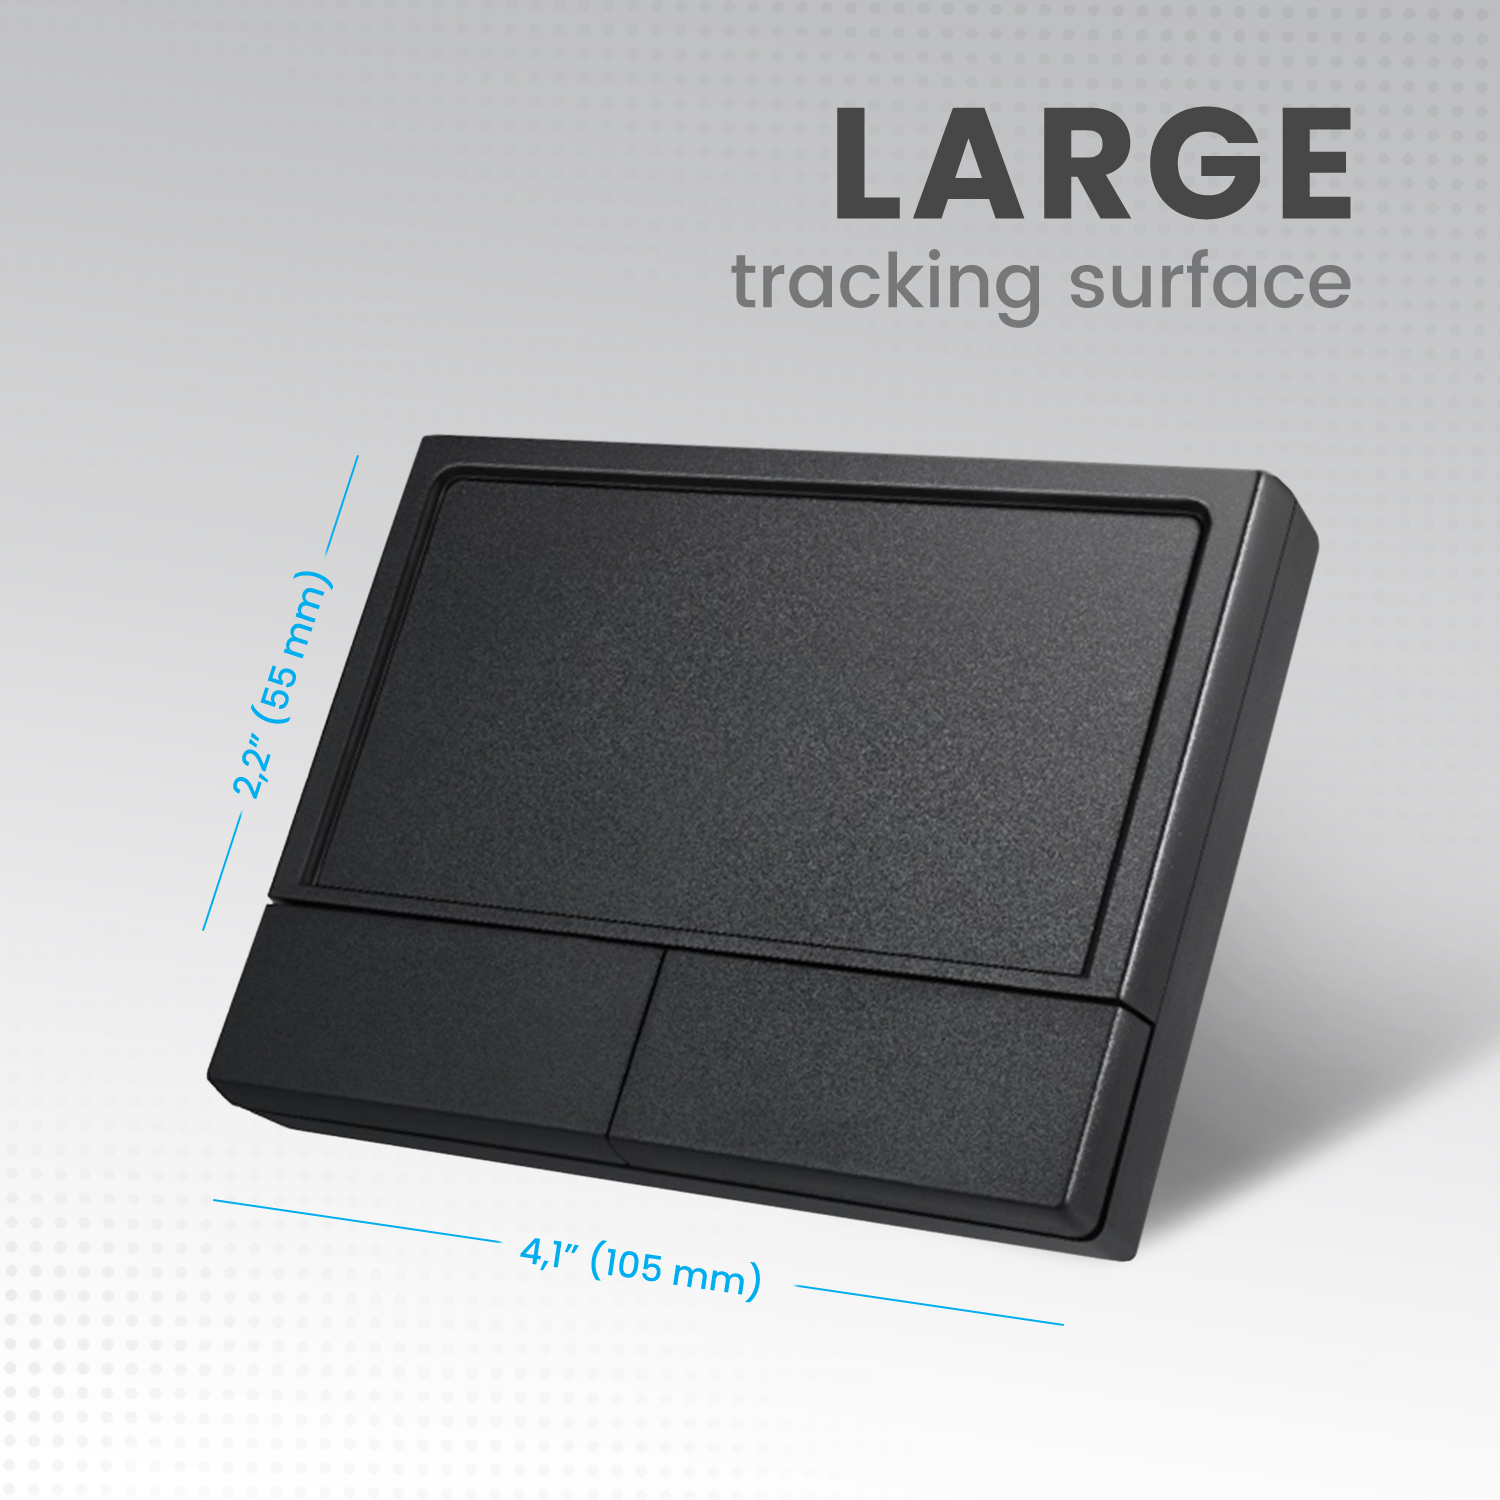 A LARGE TOUCH SURFACE